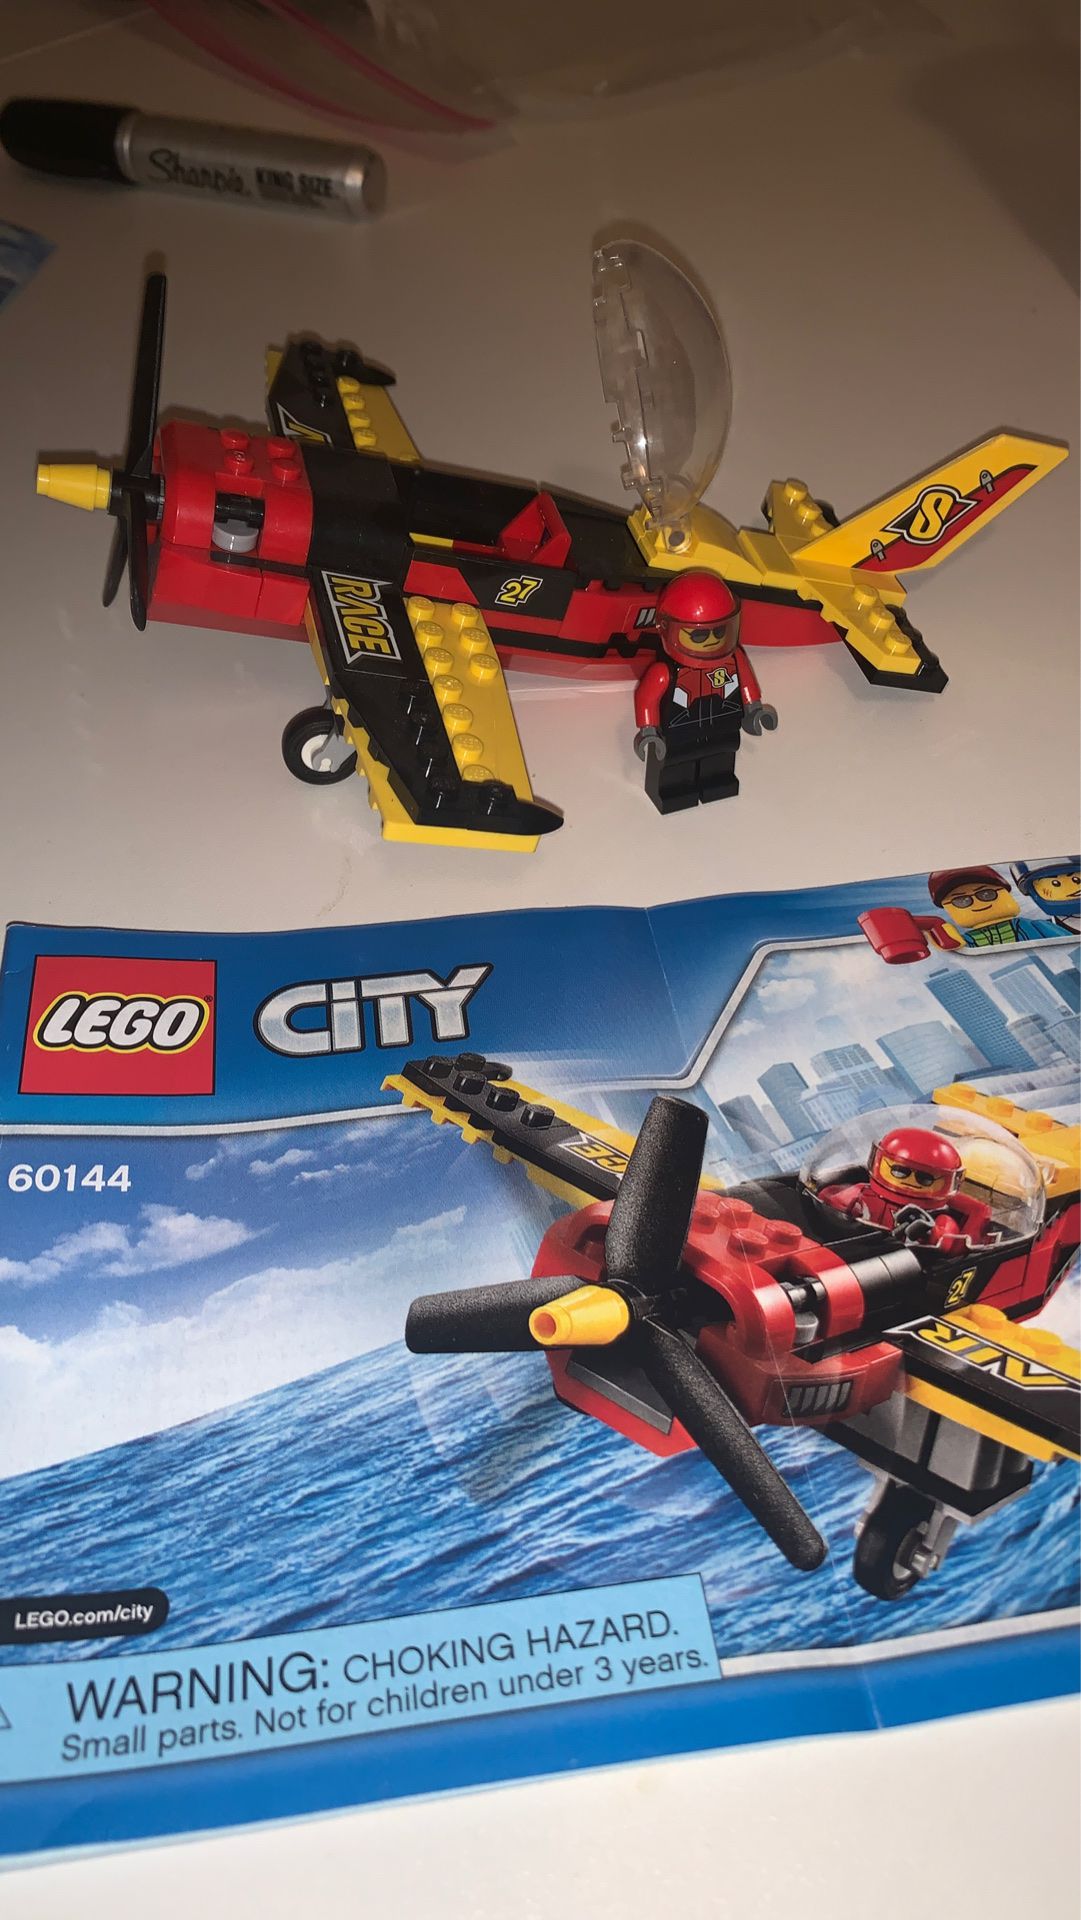 LEGO 60144 City Race Plane. Complete with figure and instructions.